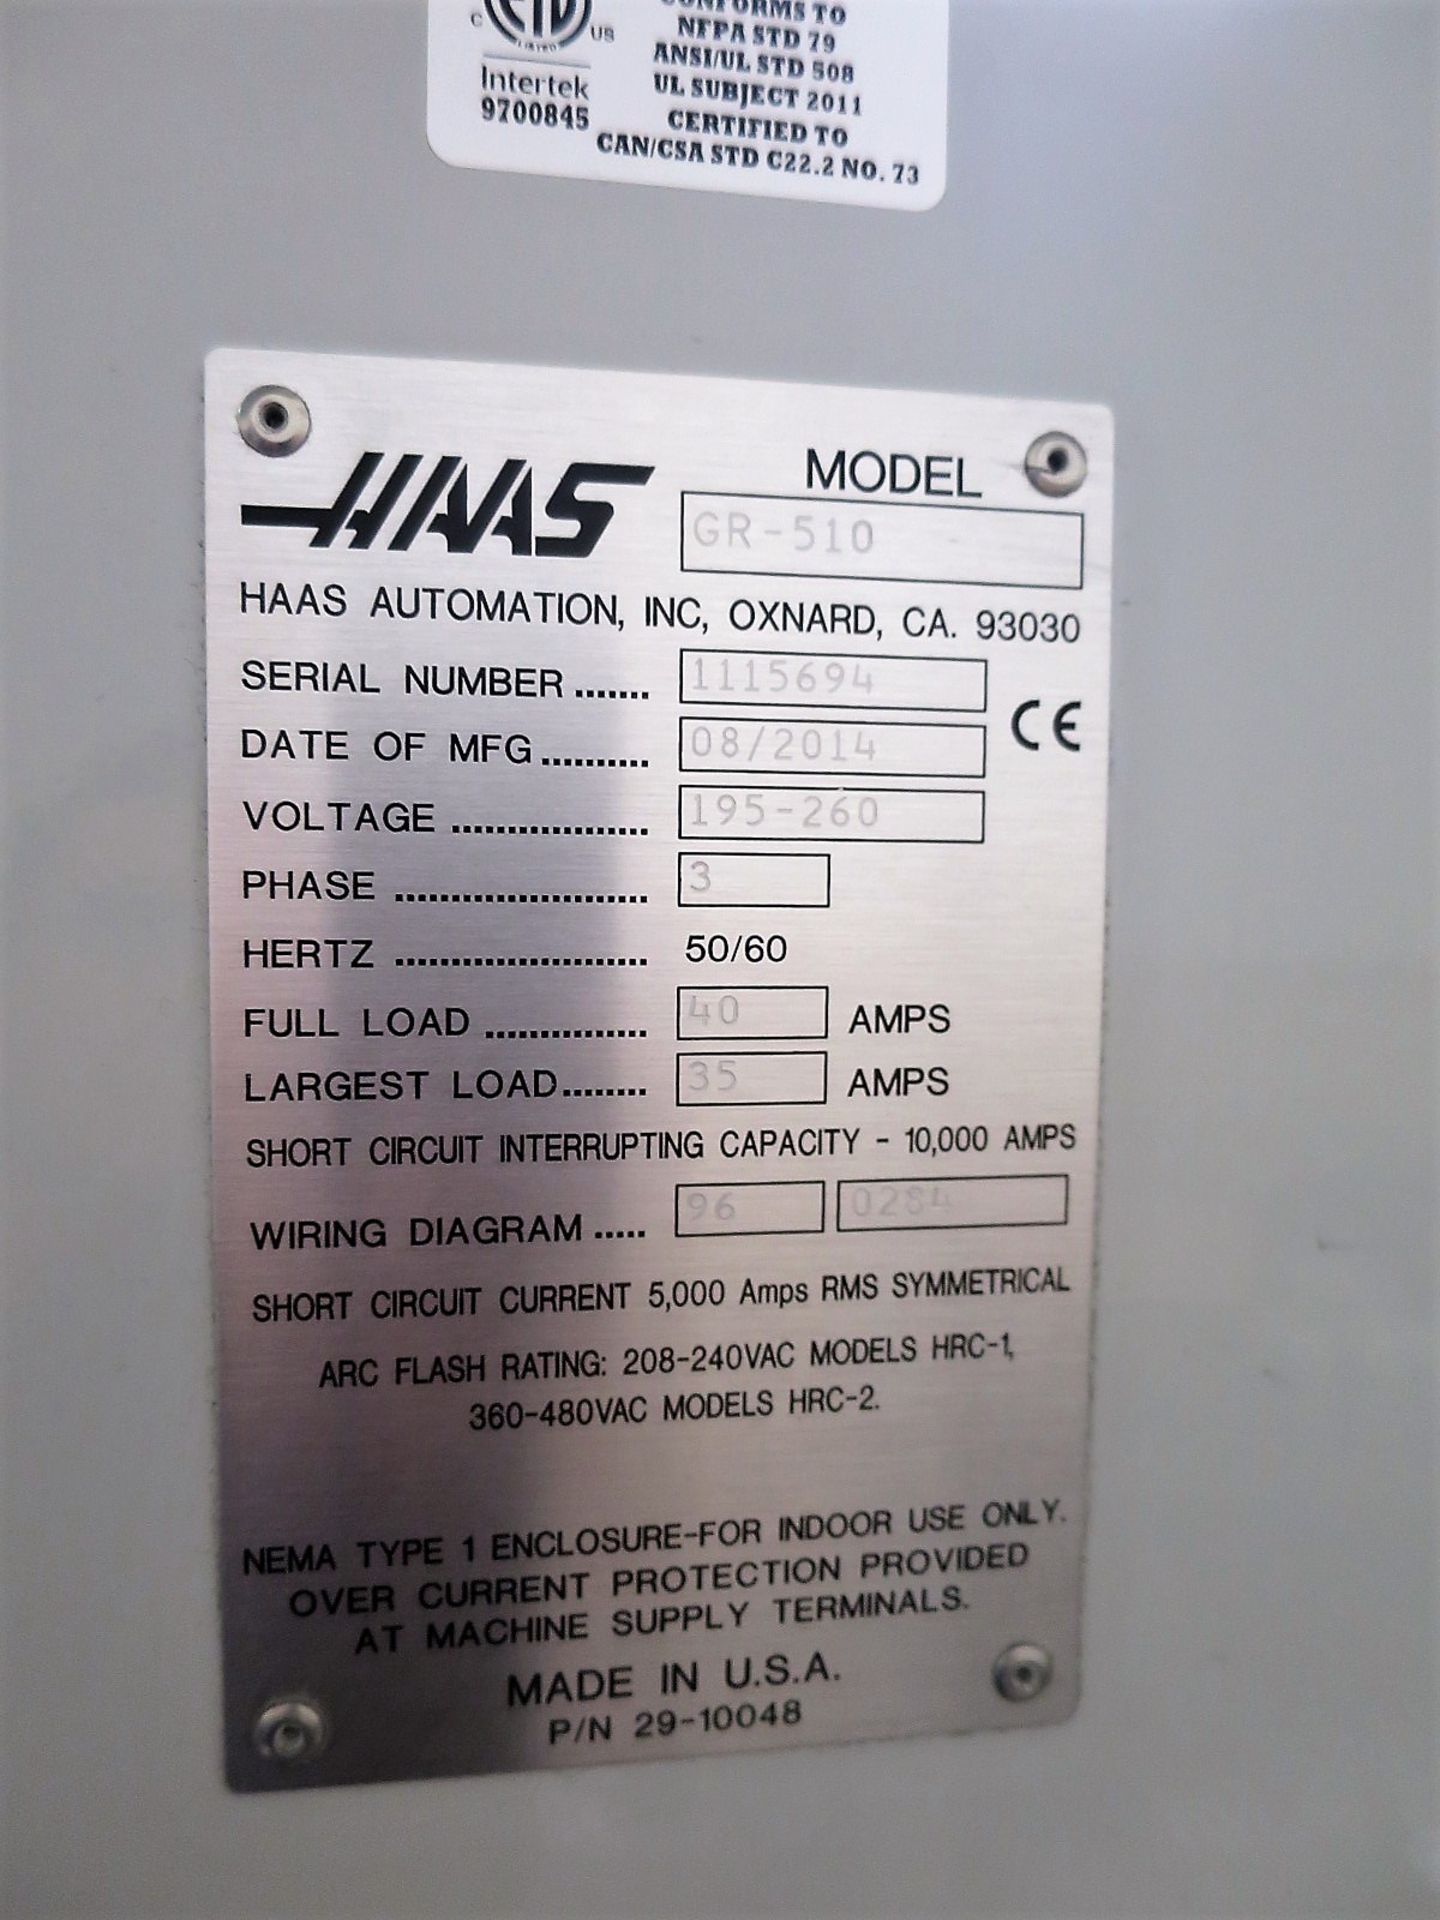 5'X10' Haas Model GR510 3-Axis CNC Router Vertical, S/N 1115694, New 20014 - Image 10 of 10